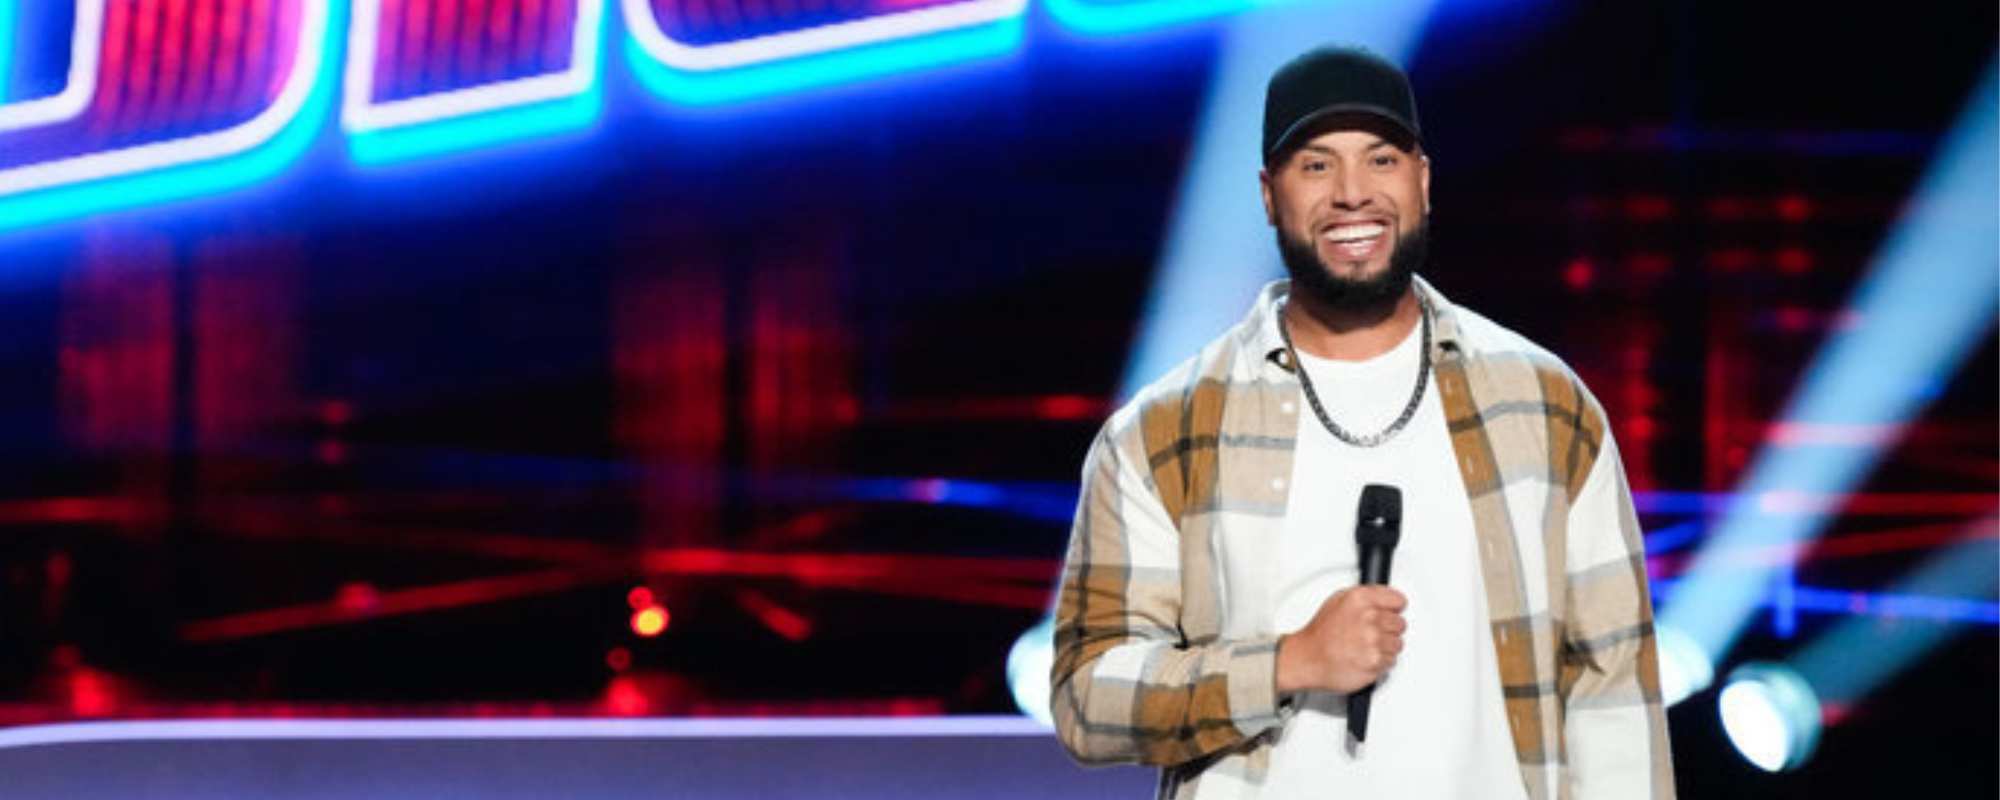 Ephraim Owens Performs Chilling Rendition of Labrinth’s ‘Beneath Your Beautiful’ on ‘The Voice’